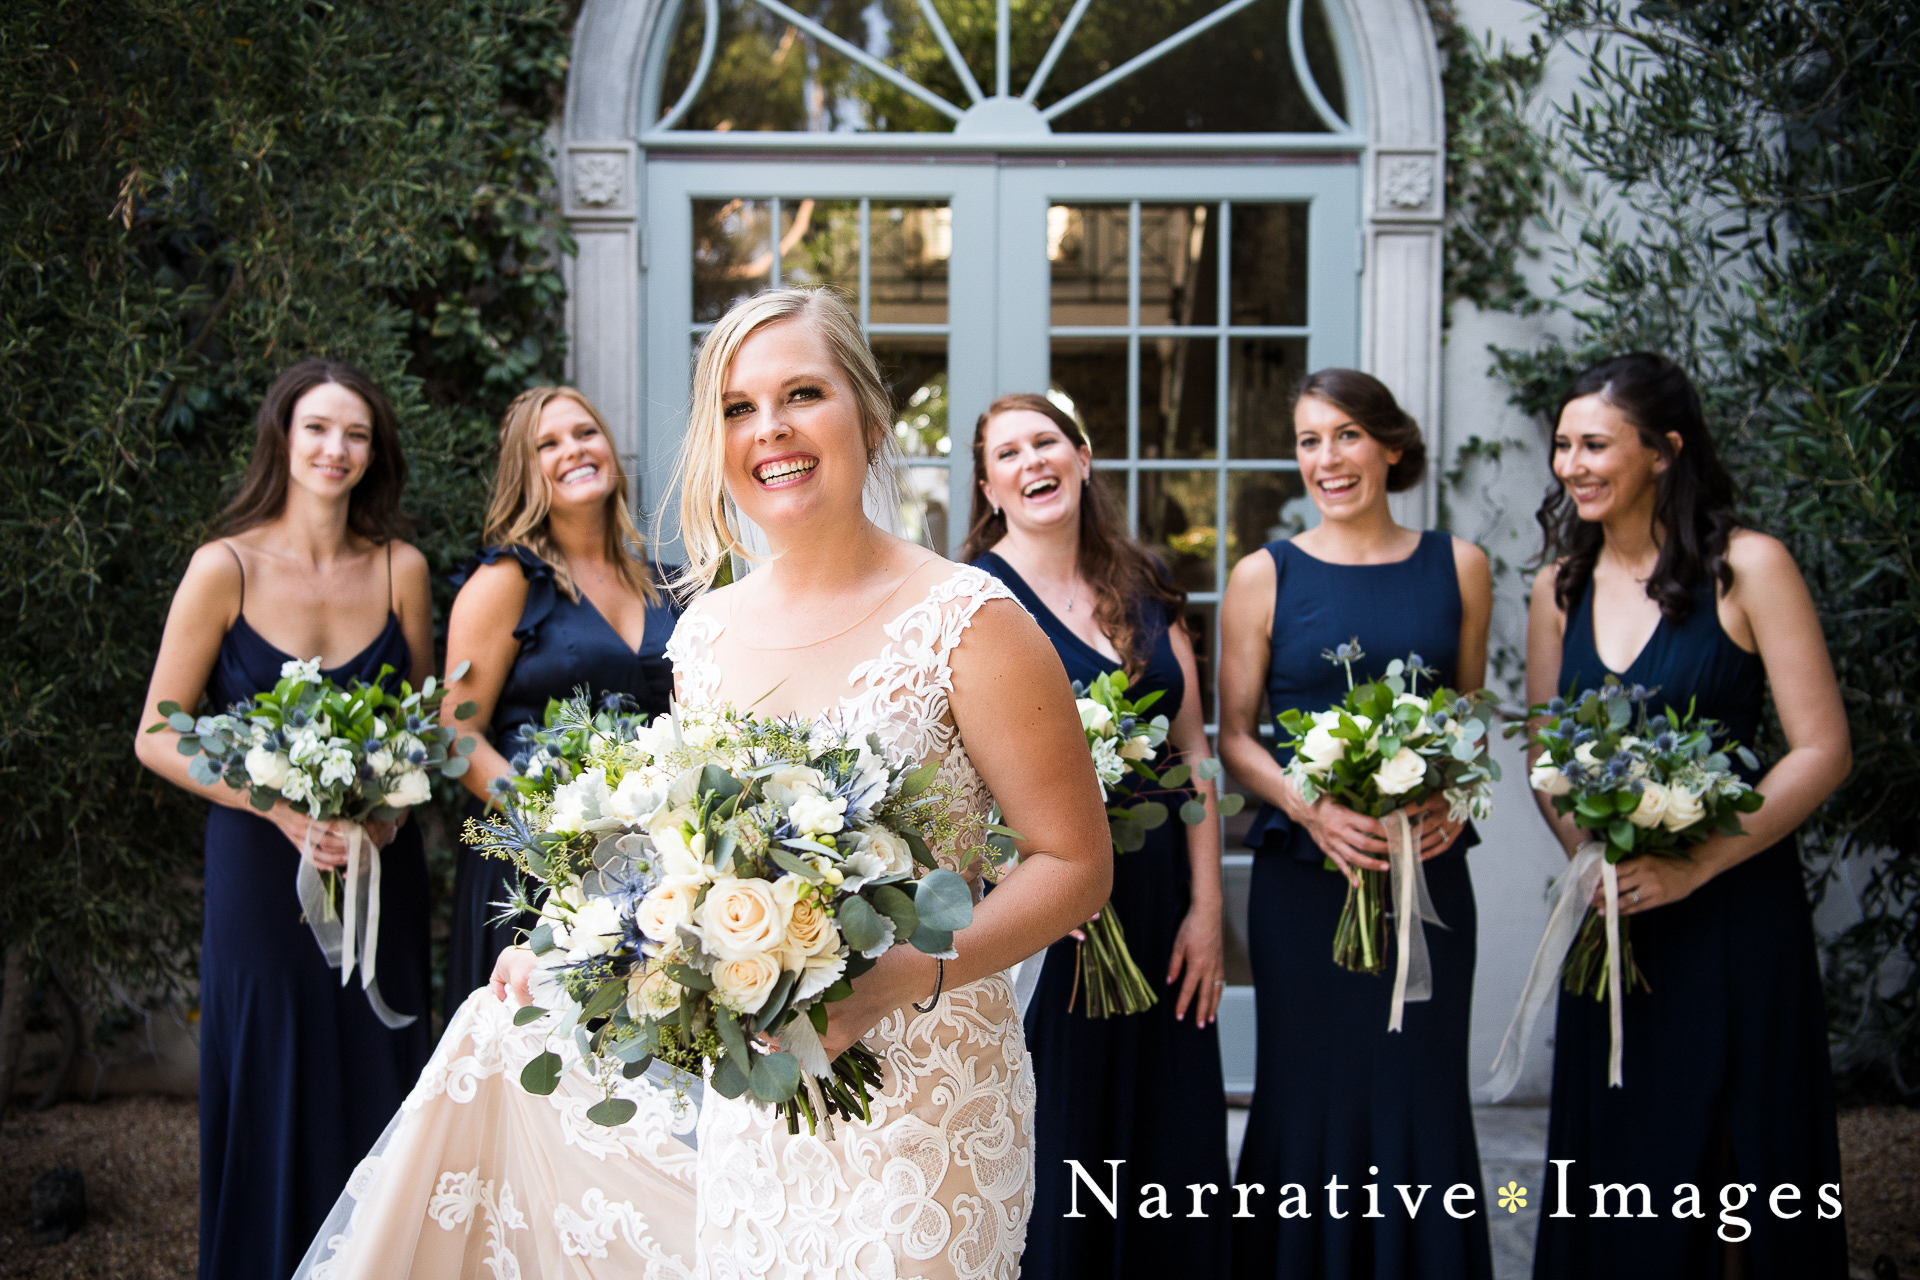 Smiling bride in lace dress and eucalyptus thistle bouquet with her bridesmaids in navy blue dresses